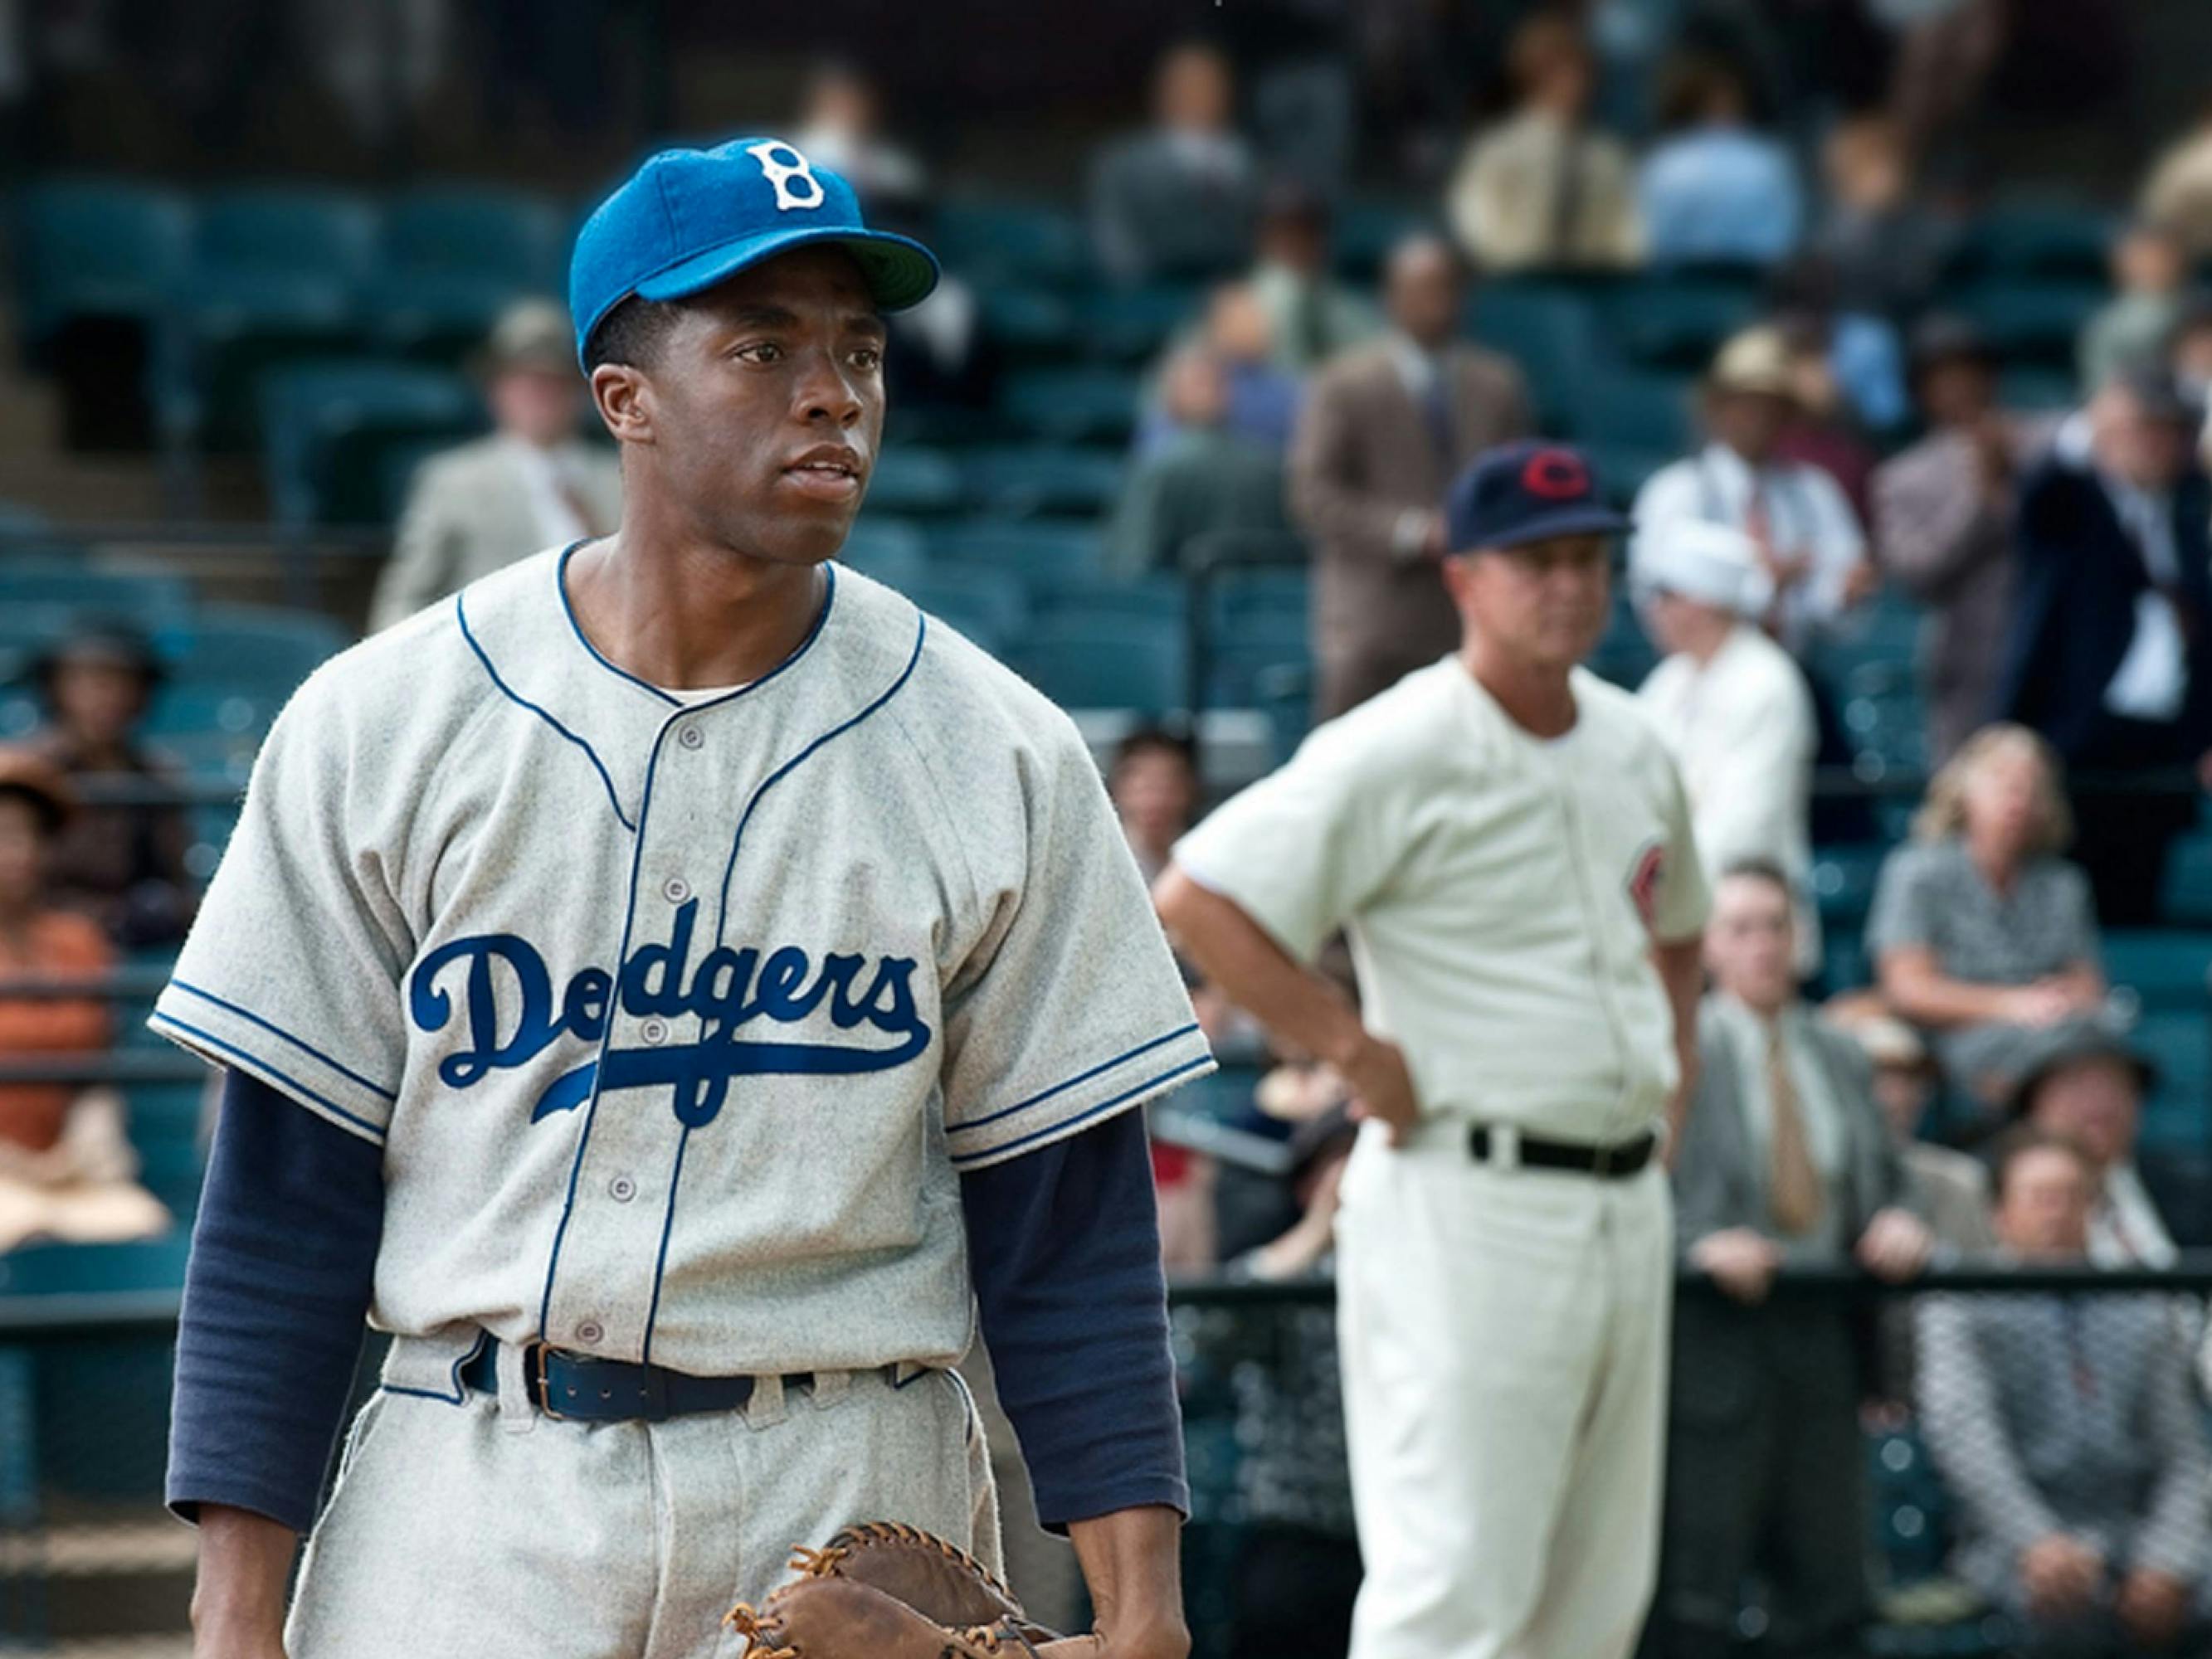 Boseman as Jackie Robinson. He wears a white Dodgers uniform with blue stitching and a blue Dodgers hat with a B for Brooklyn. He also carries a mit. In the background there are spectators in the stands and players from the opposite team.